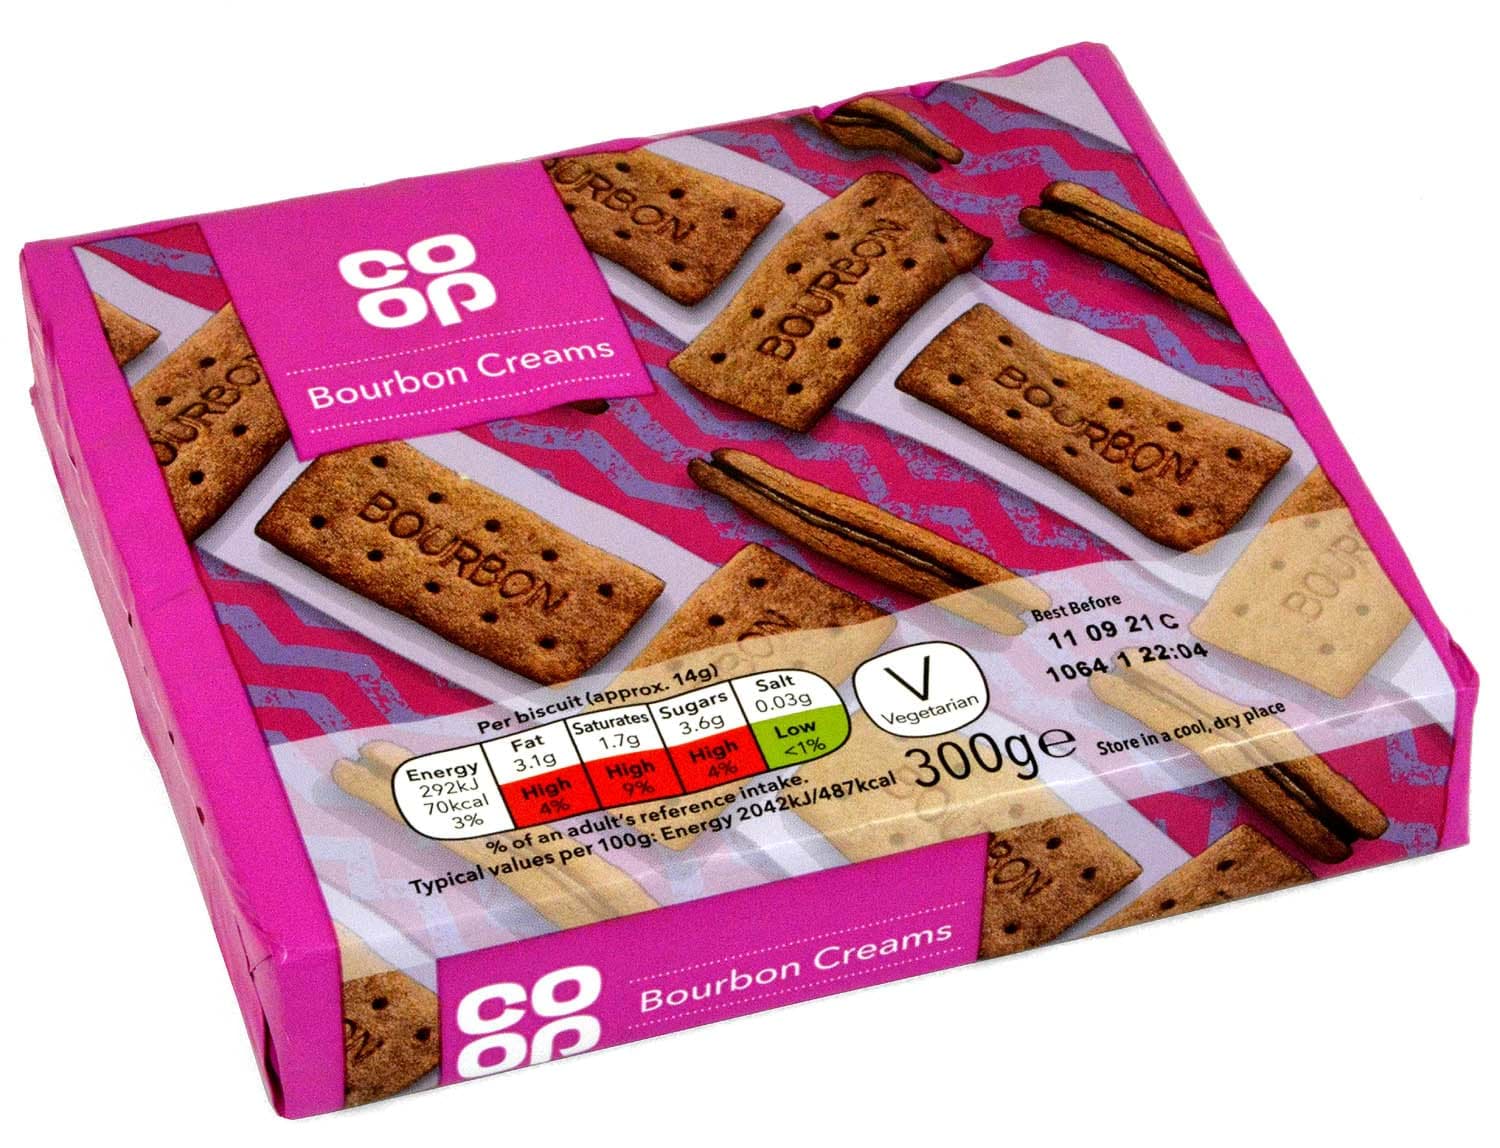 Picture of Co-op Bourbon Creams 300g Sandwich Biscuits